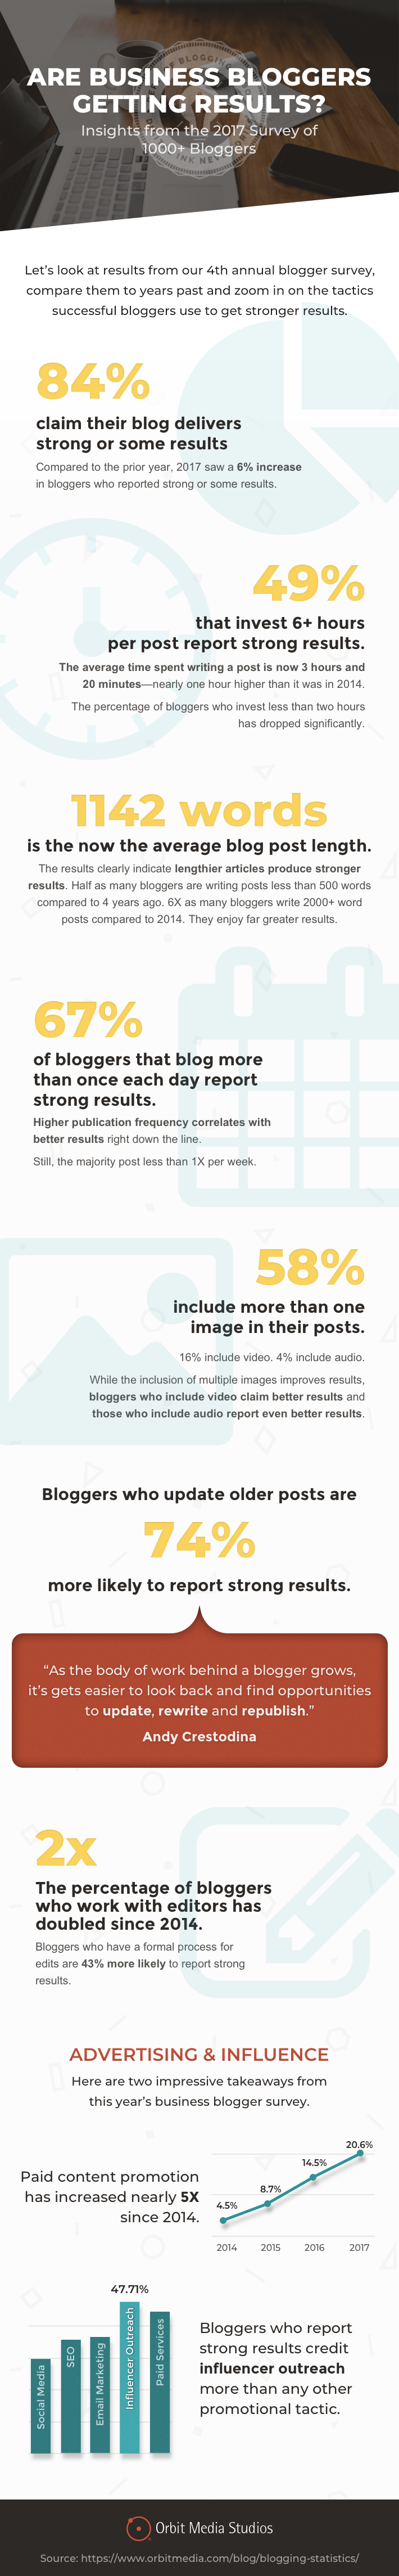 Does Business Blogging Still Get Results in 2017? New Data from 1,000 Bloggers - #Infographic